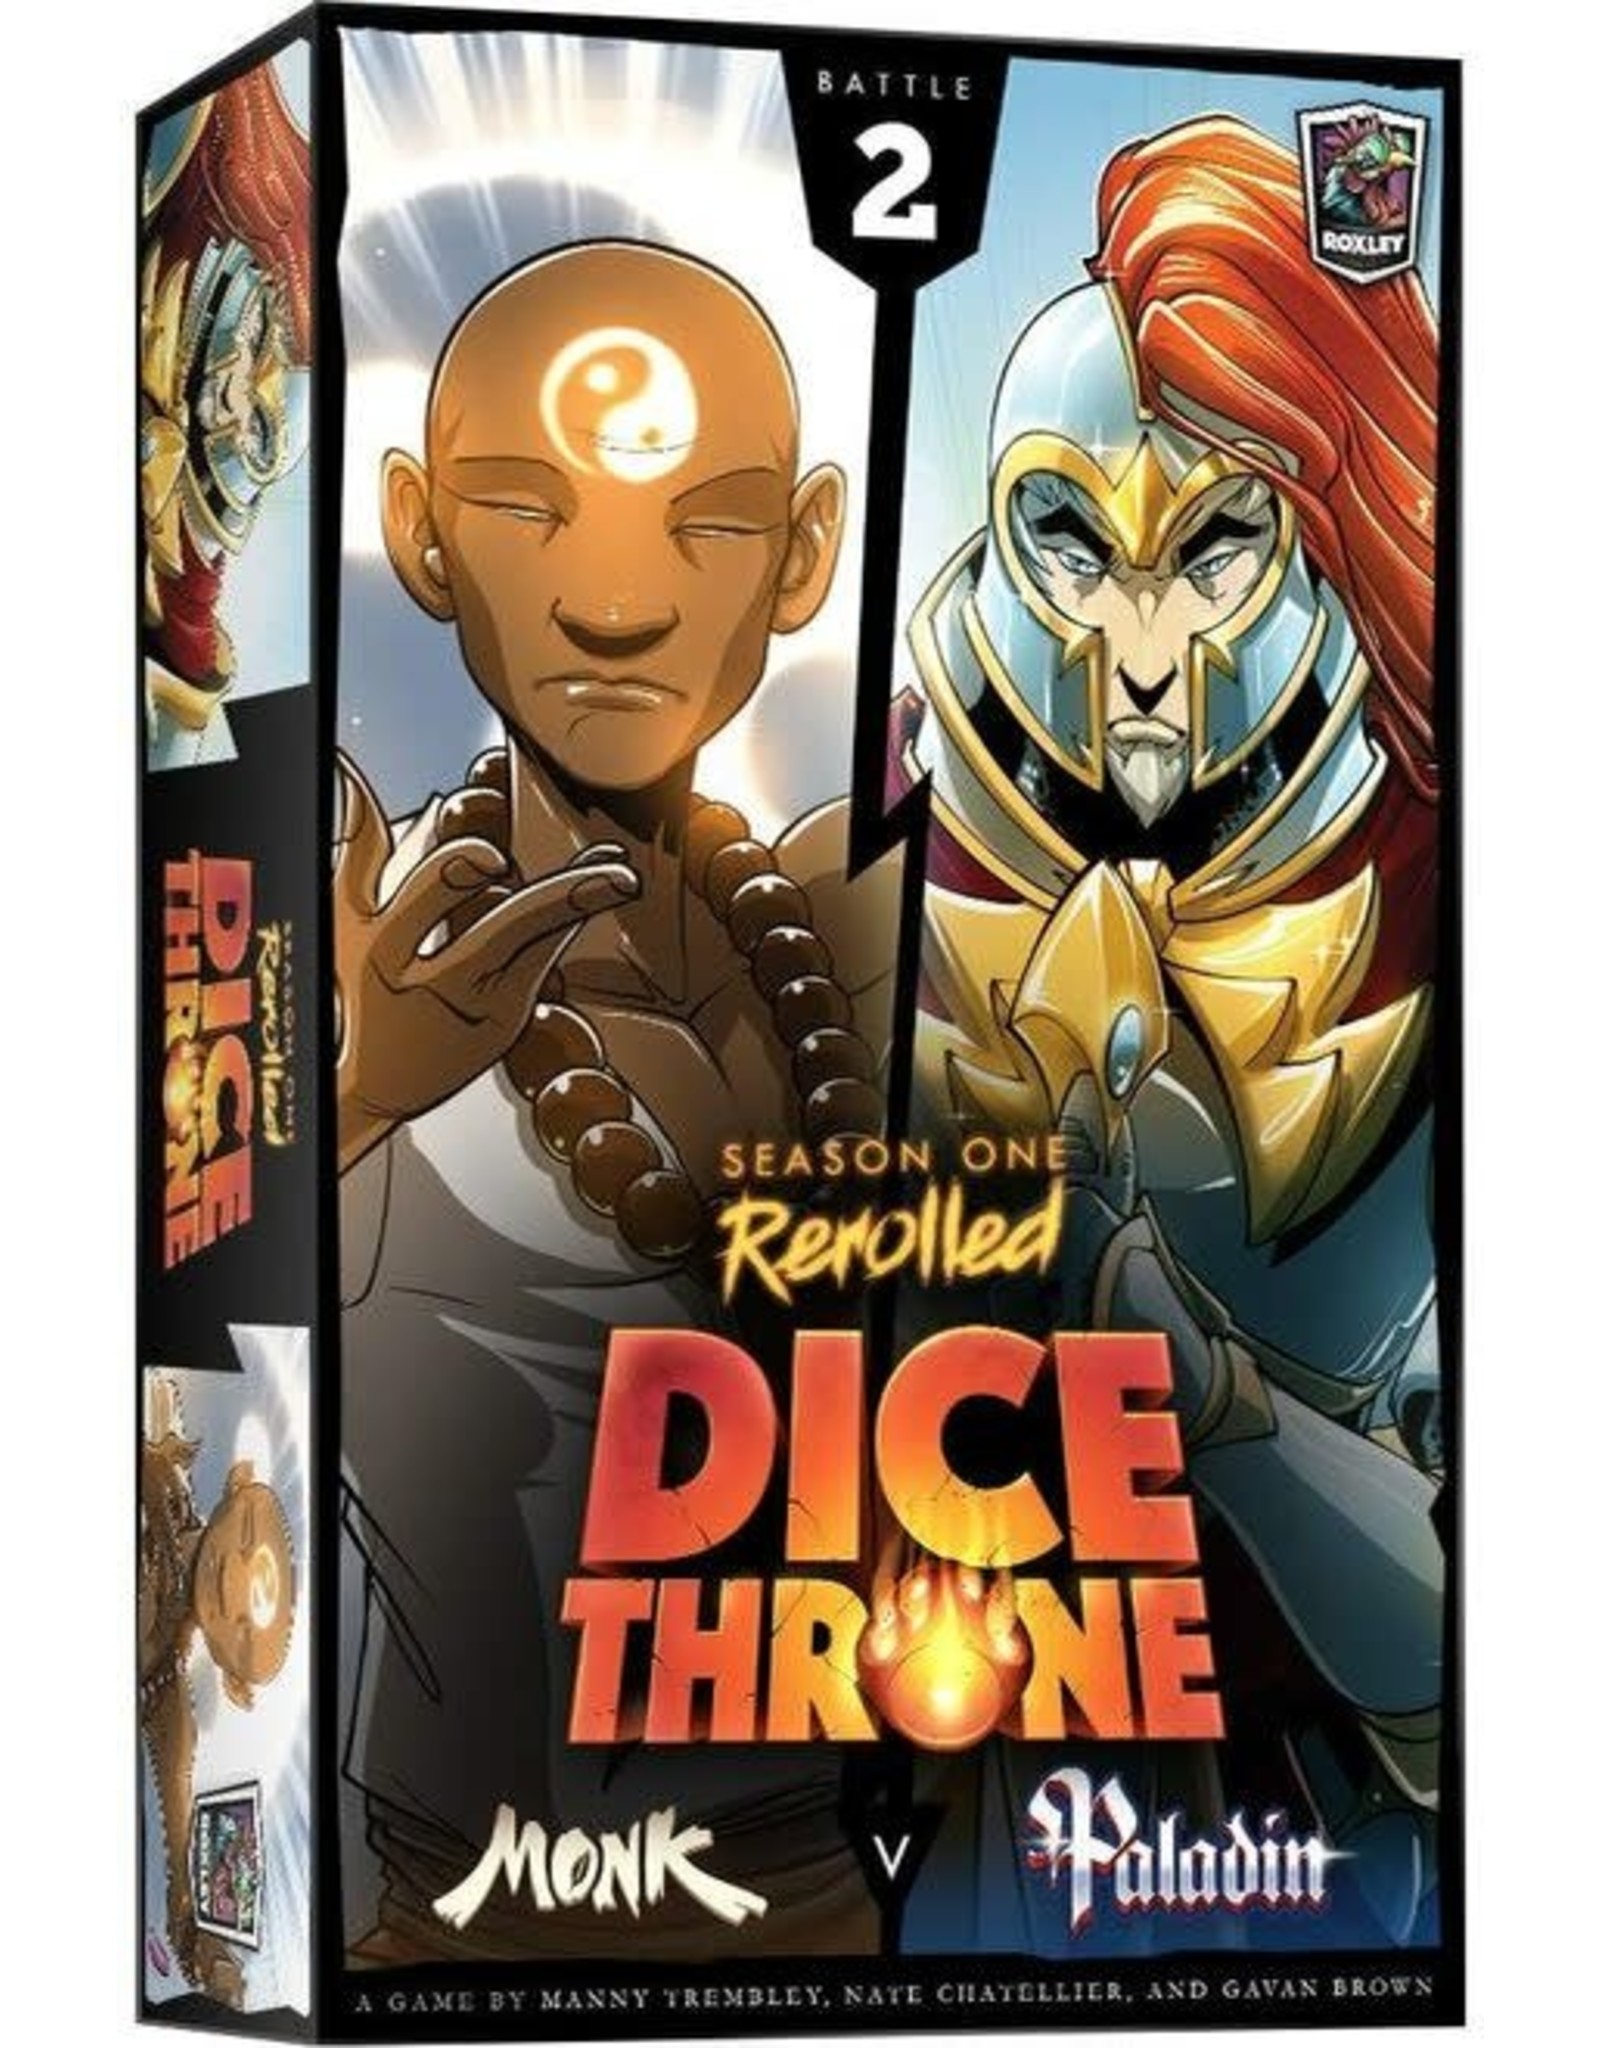 Roxley Game Labs Dice Throne: Season 1 Rerolled Monk vs. Paladin